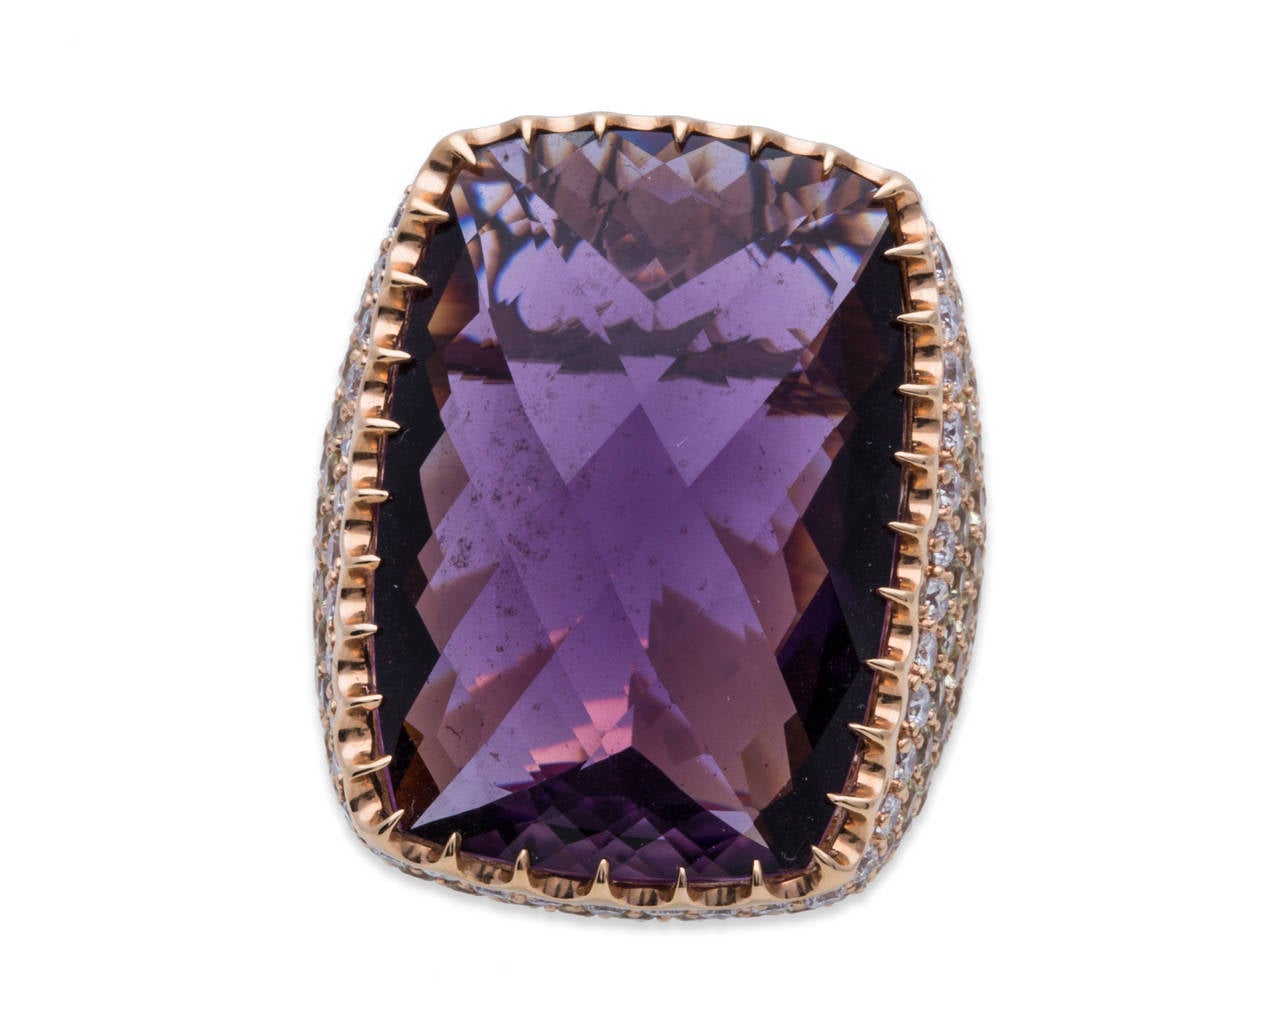 Crivelli Large Amethyst Diamond and Sapphire Ring in 18K Yellow Gold, Center Stone is a Large Amethyst 1.00